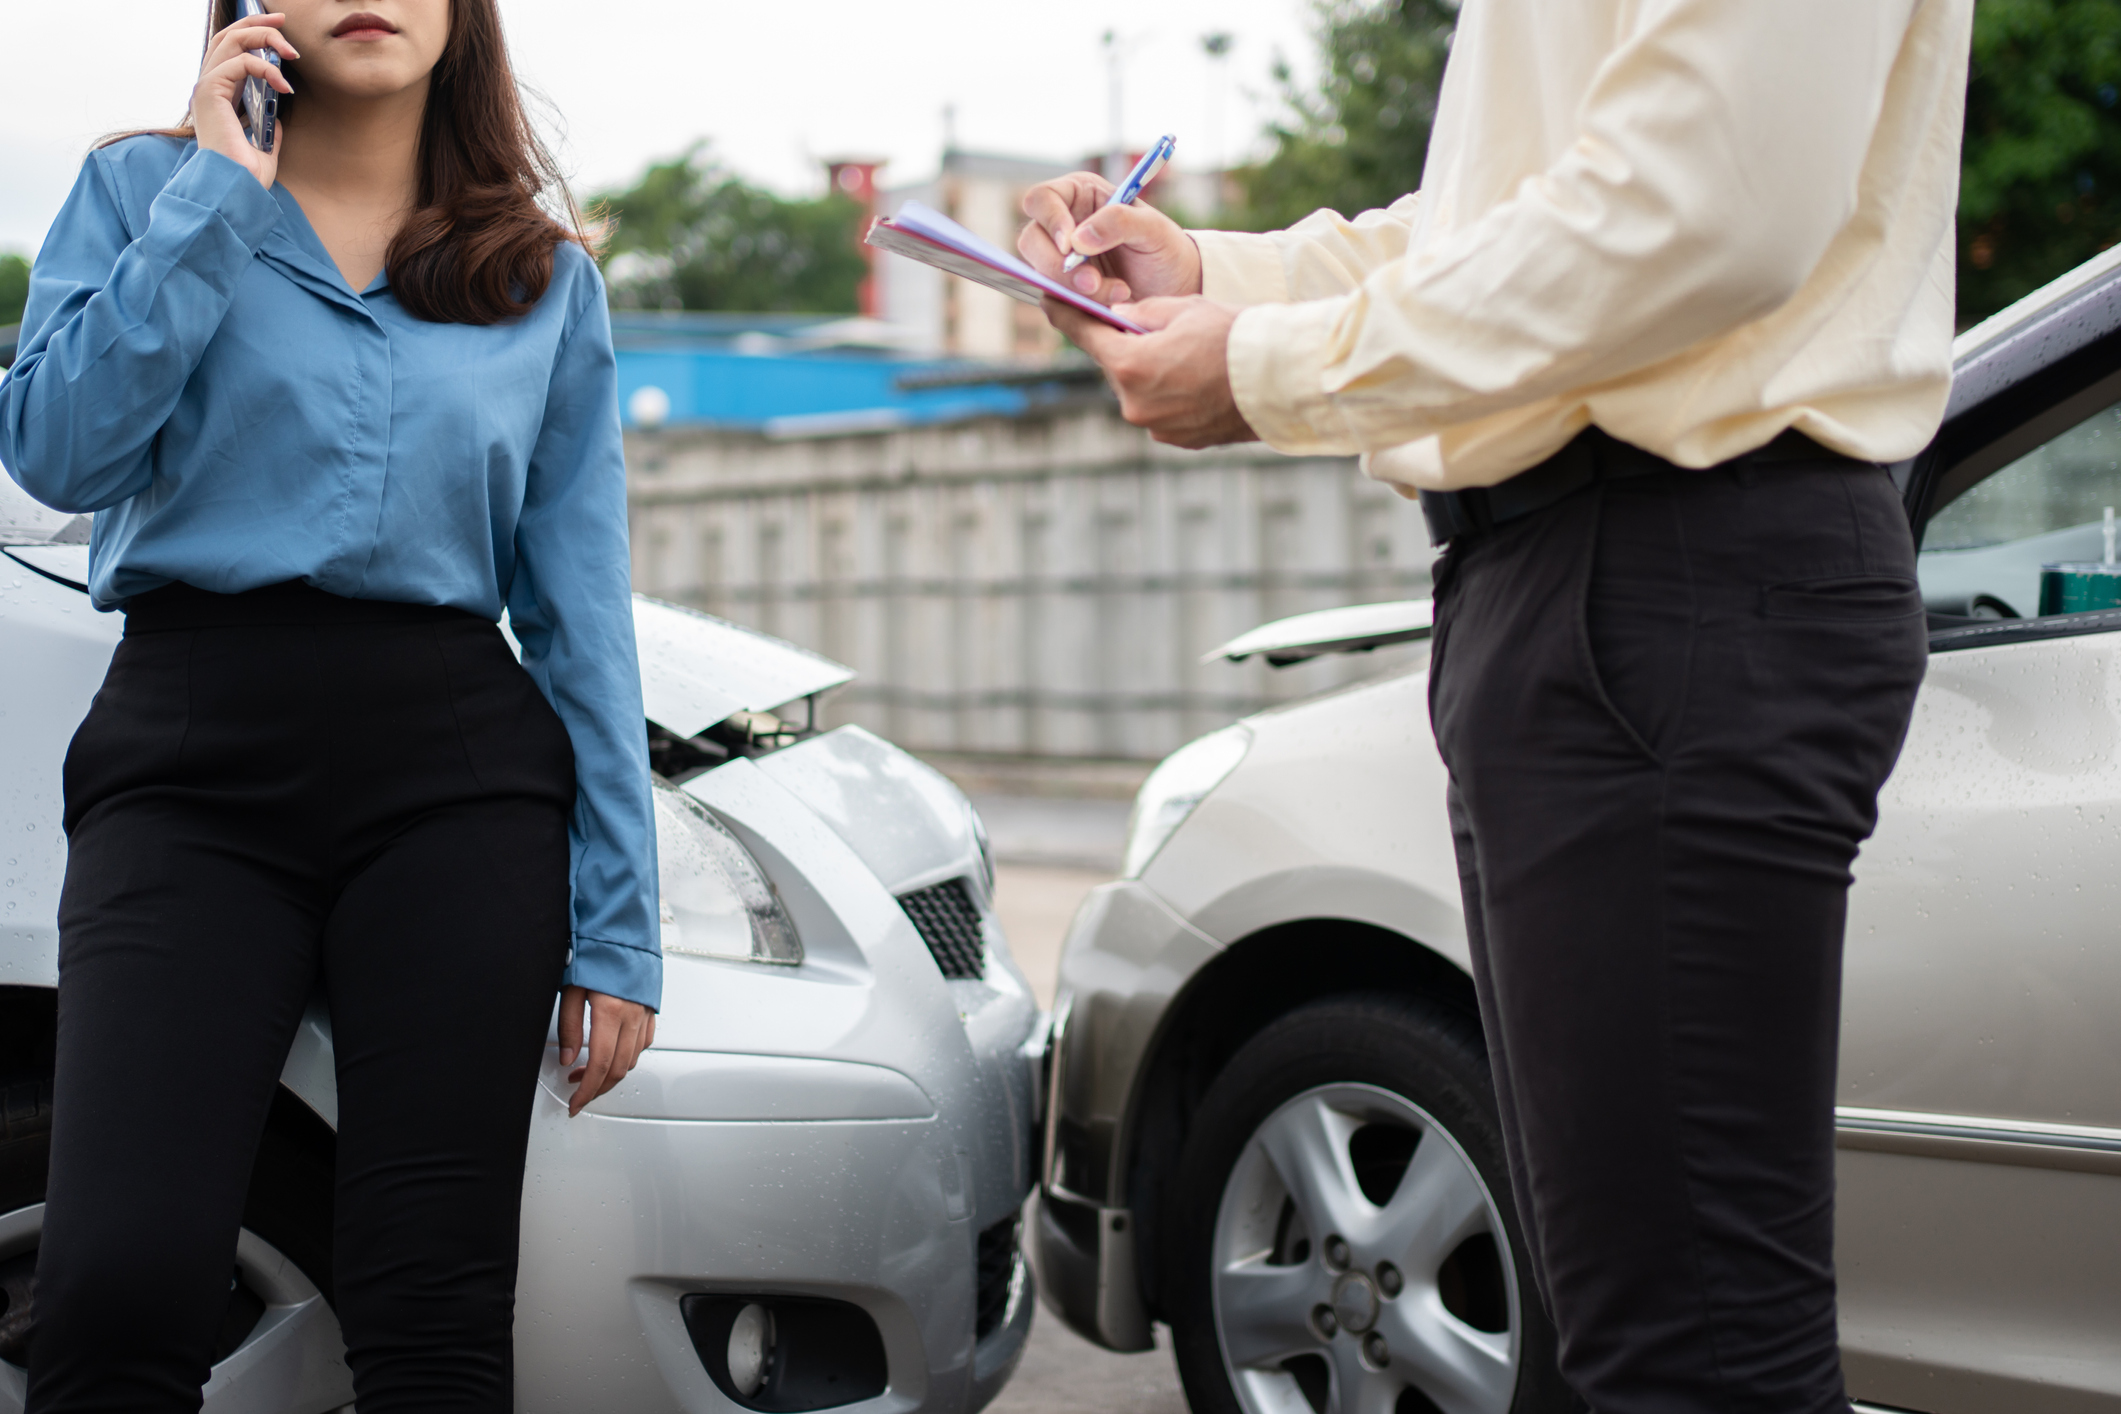 How Long Do I Have to File a Car Accident Injury Claim in Texas?